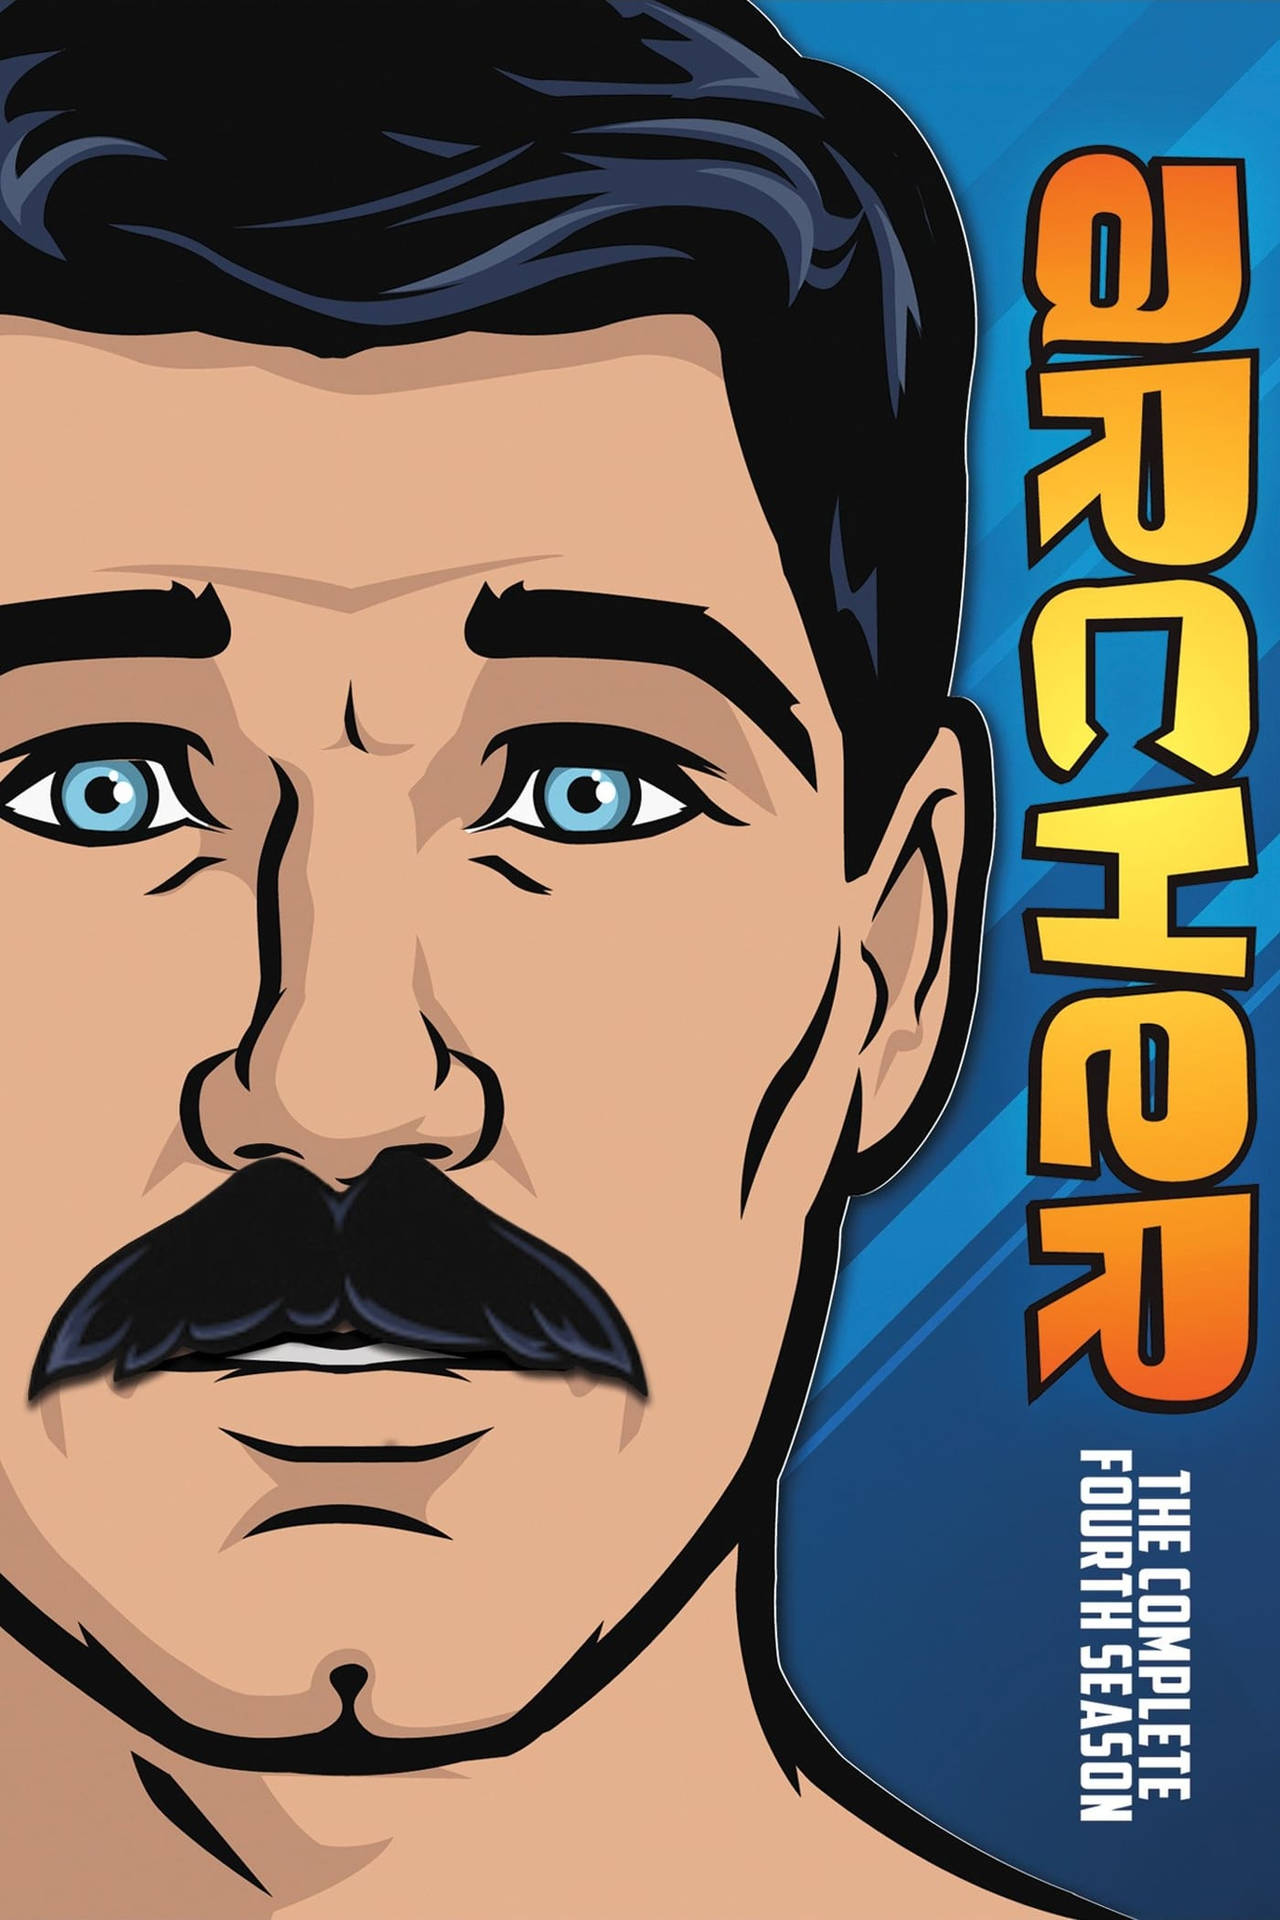 Sterling Archer ready for action - Archer Season 4 DVD Poster Wallpaper